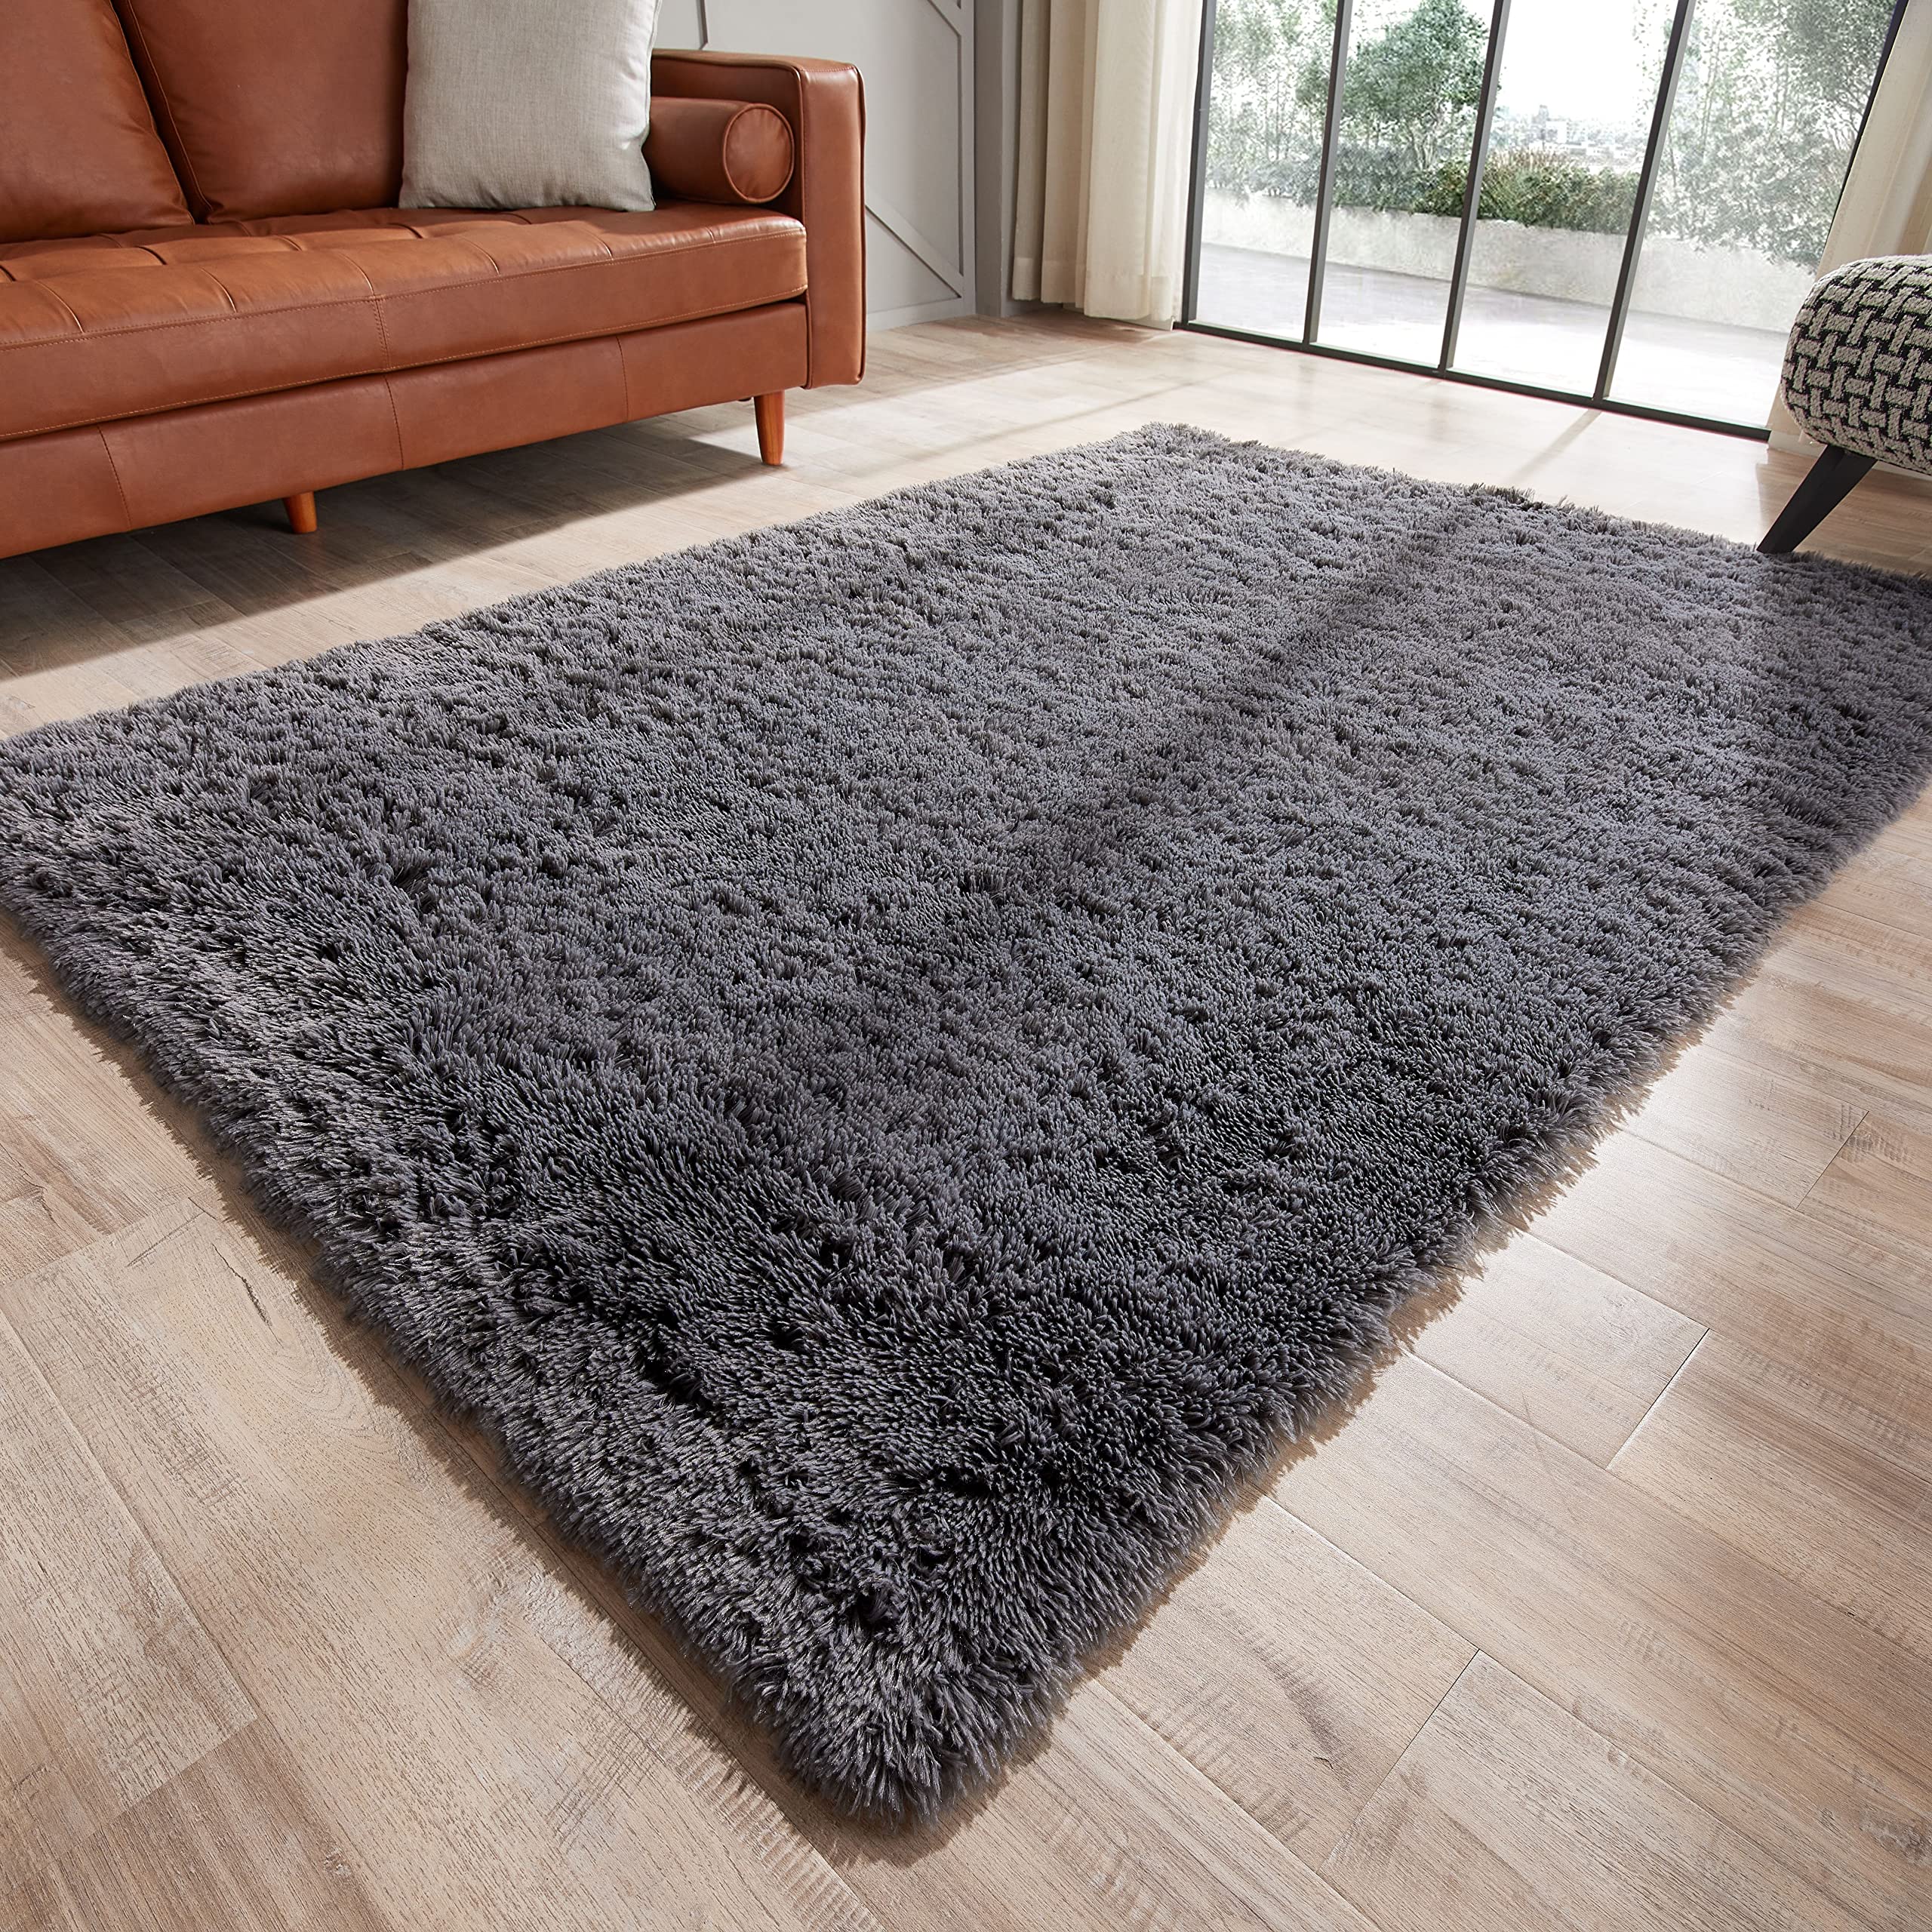 GKLUCKIN Shag Ultra Soft Area Rug, Fluffy 4'x6' Dark Grey Rugs Plush Non-Skid Indoor Fuzzy Faux Fur Rugs Furry Accent Carpets for Living Ro...